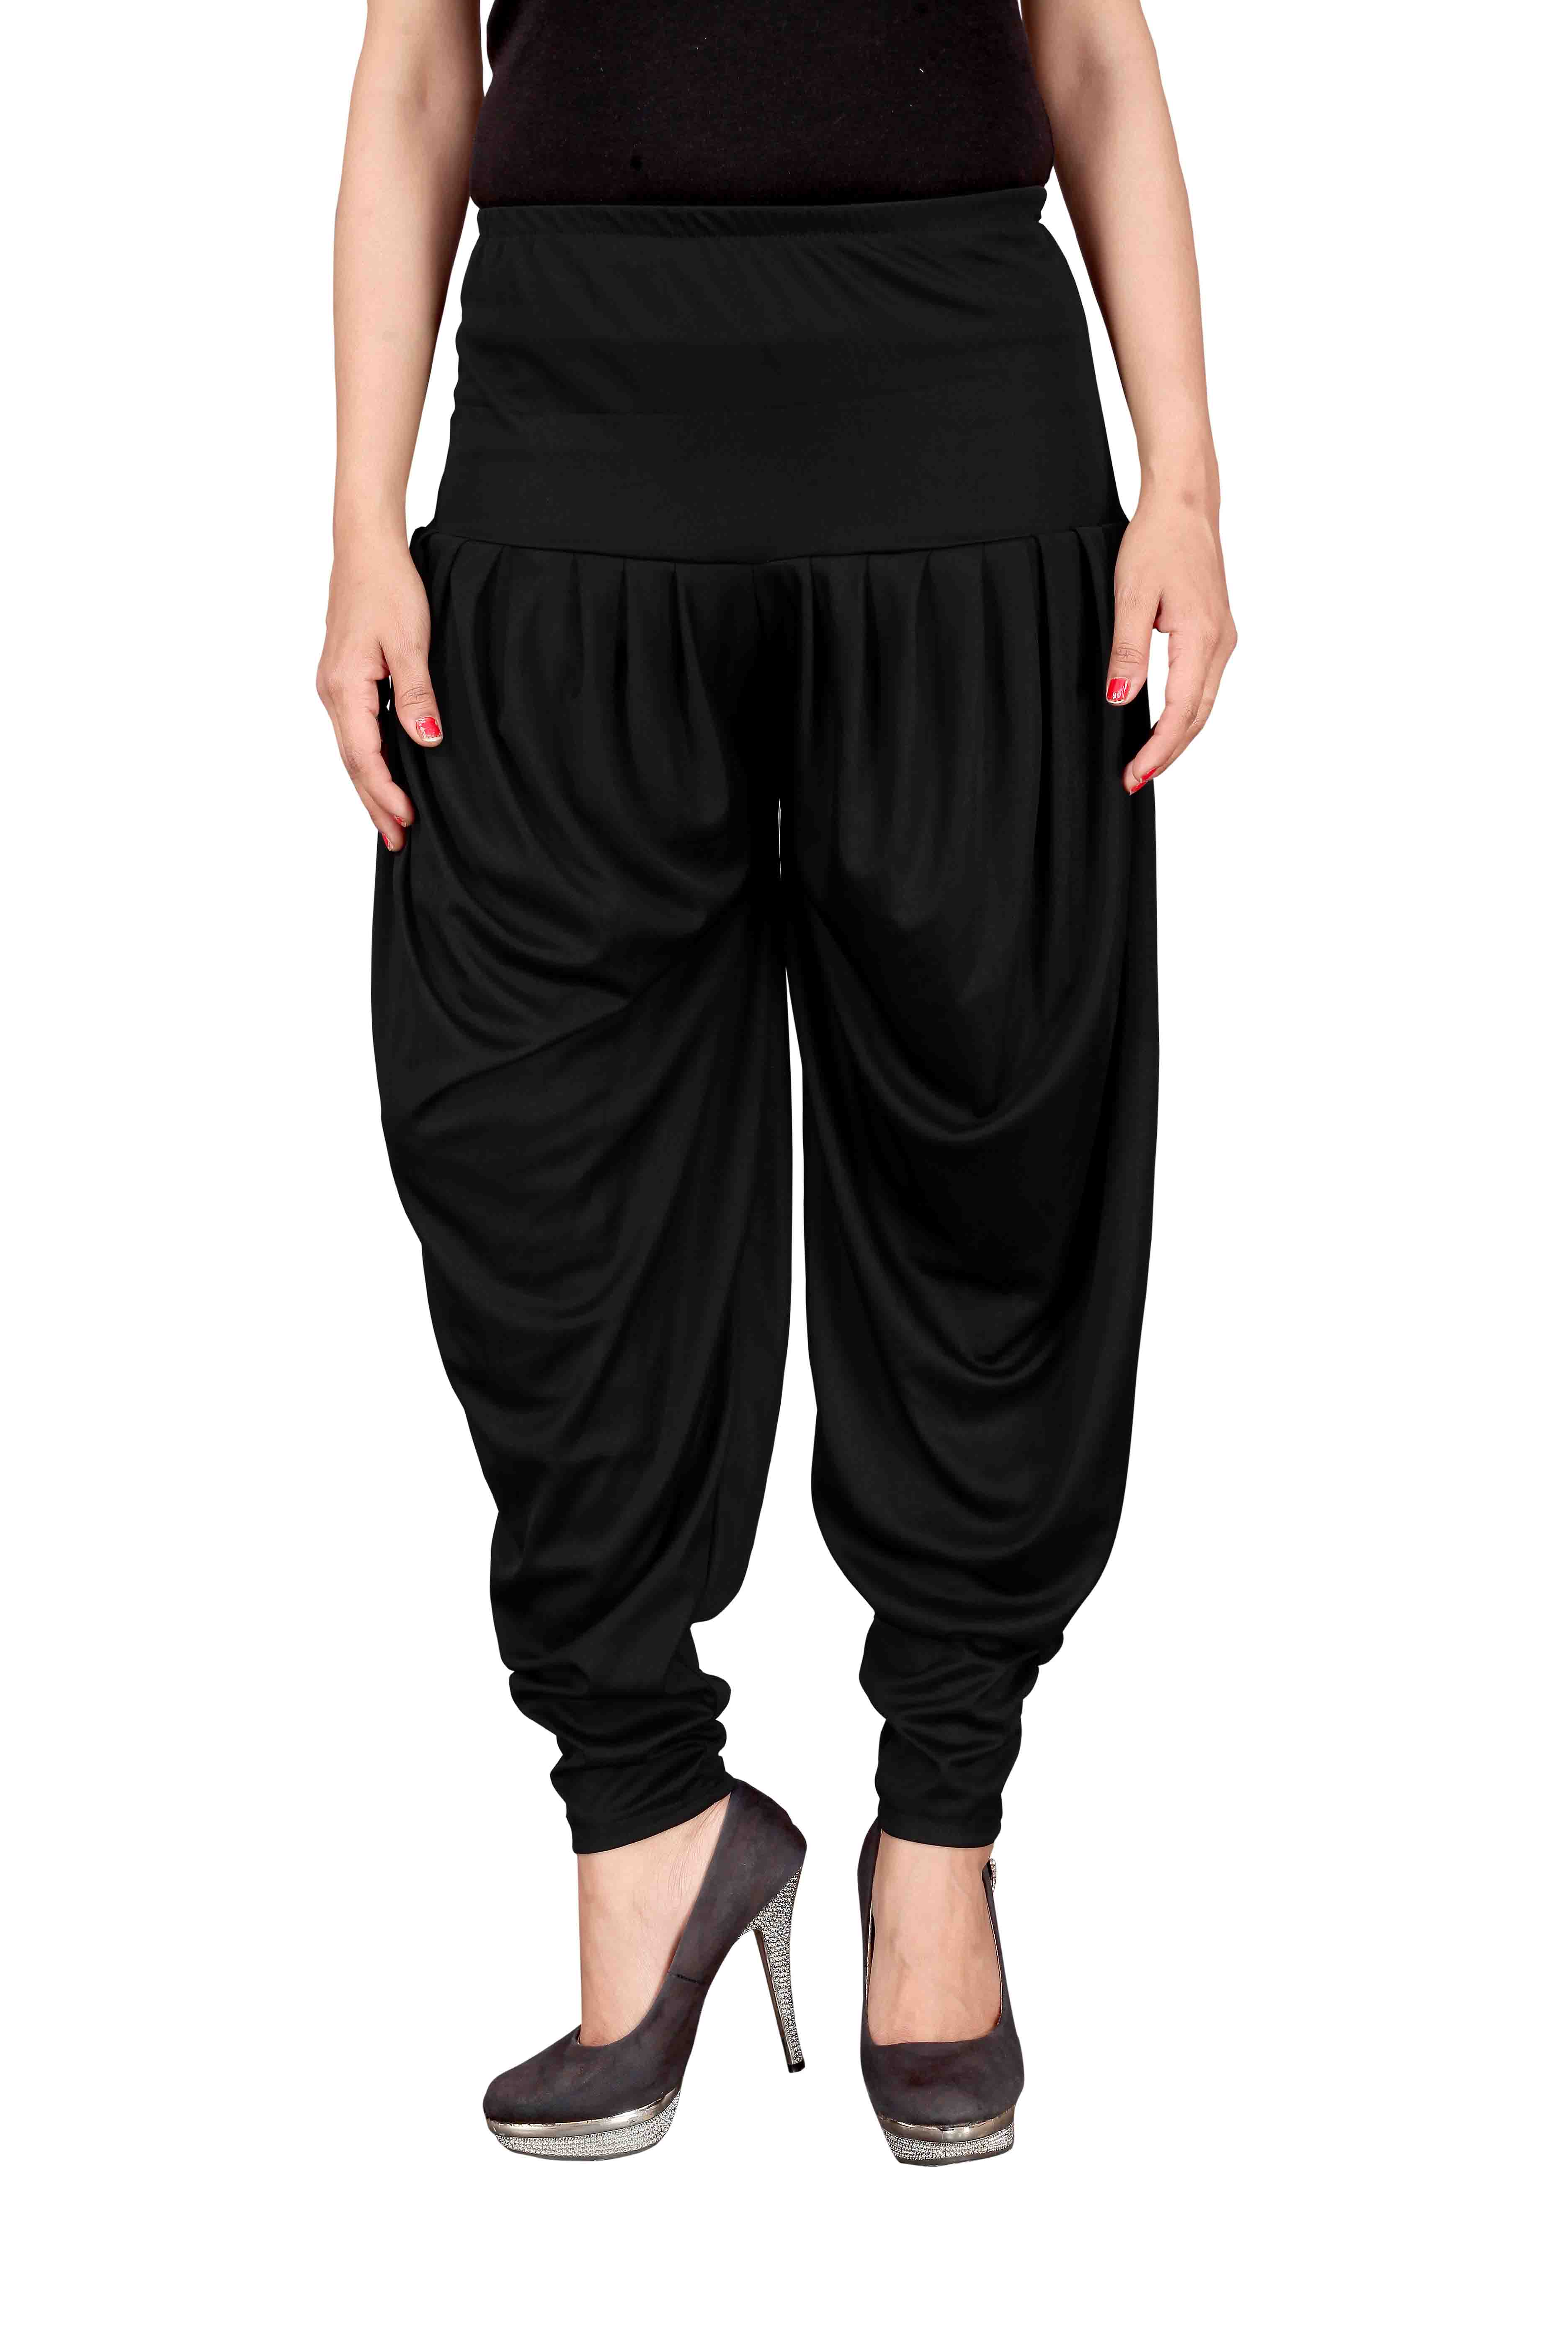 Buy Culture the Dignity Black Lycra Dhoti Pants Online @ ₹409 from ...